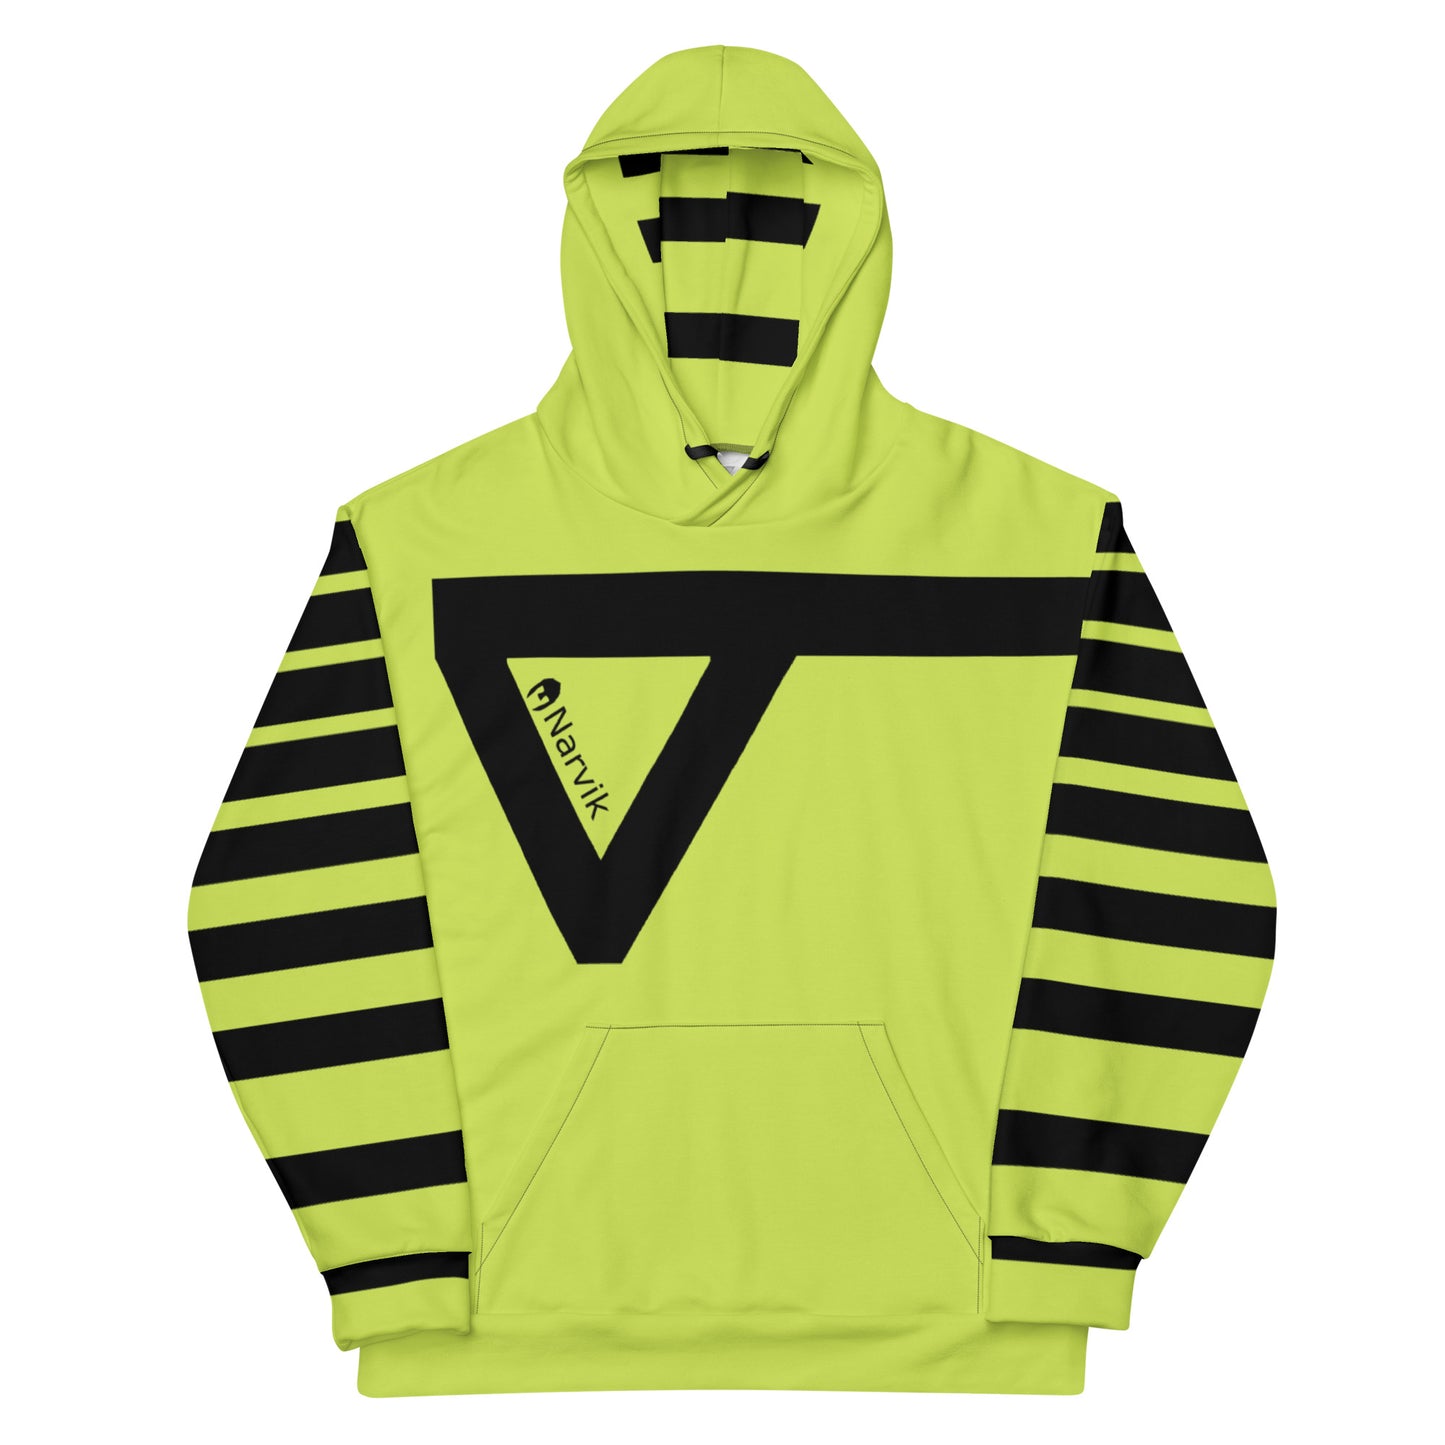 Fluorescent yellow hoodie with black rings on sleaves made for surfers and water sports enthusiasts